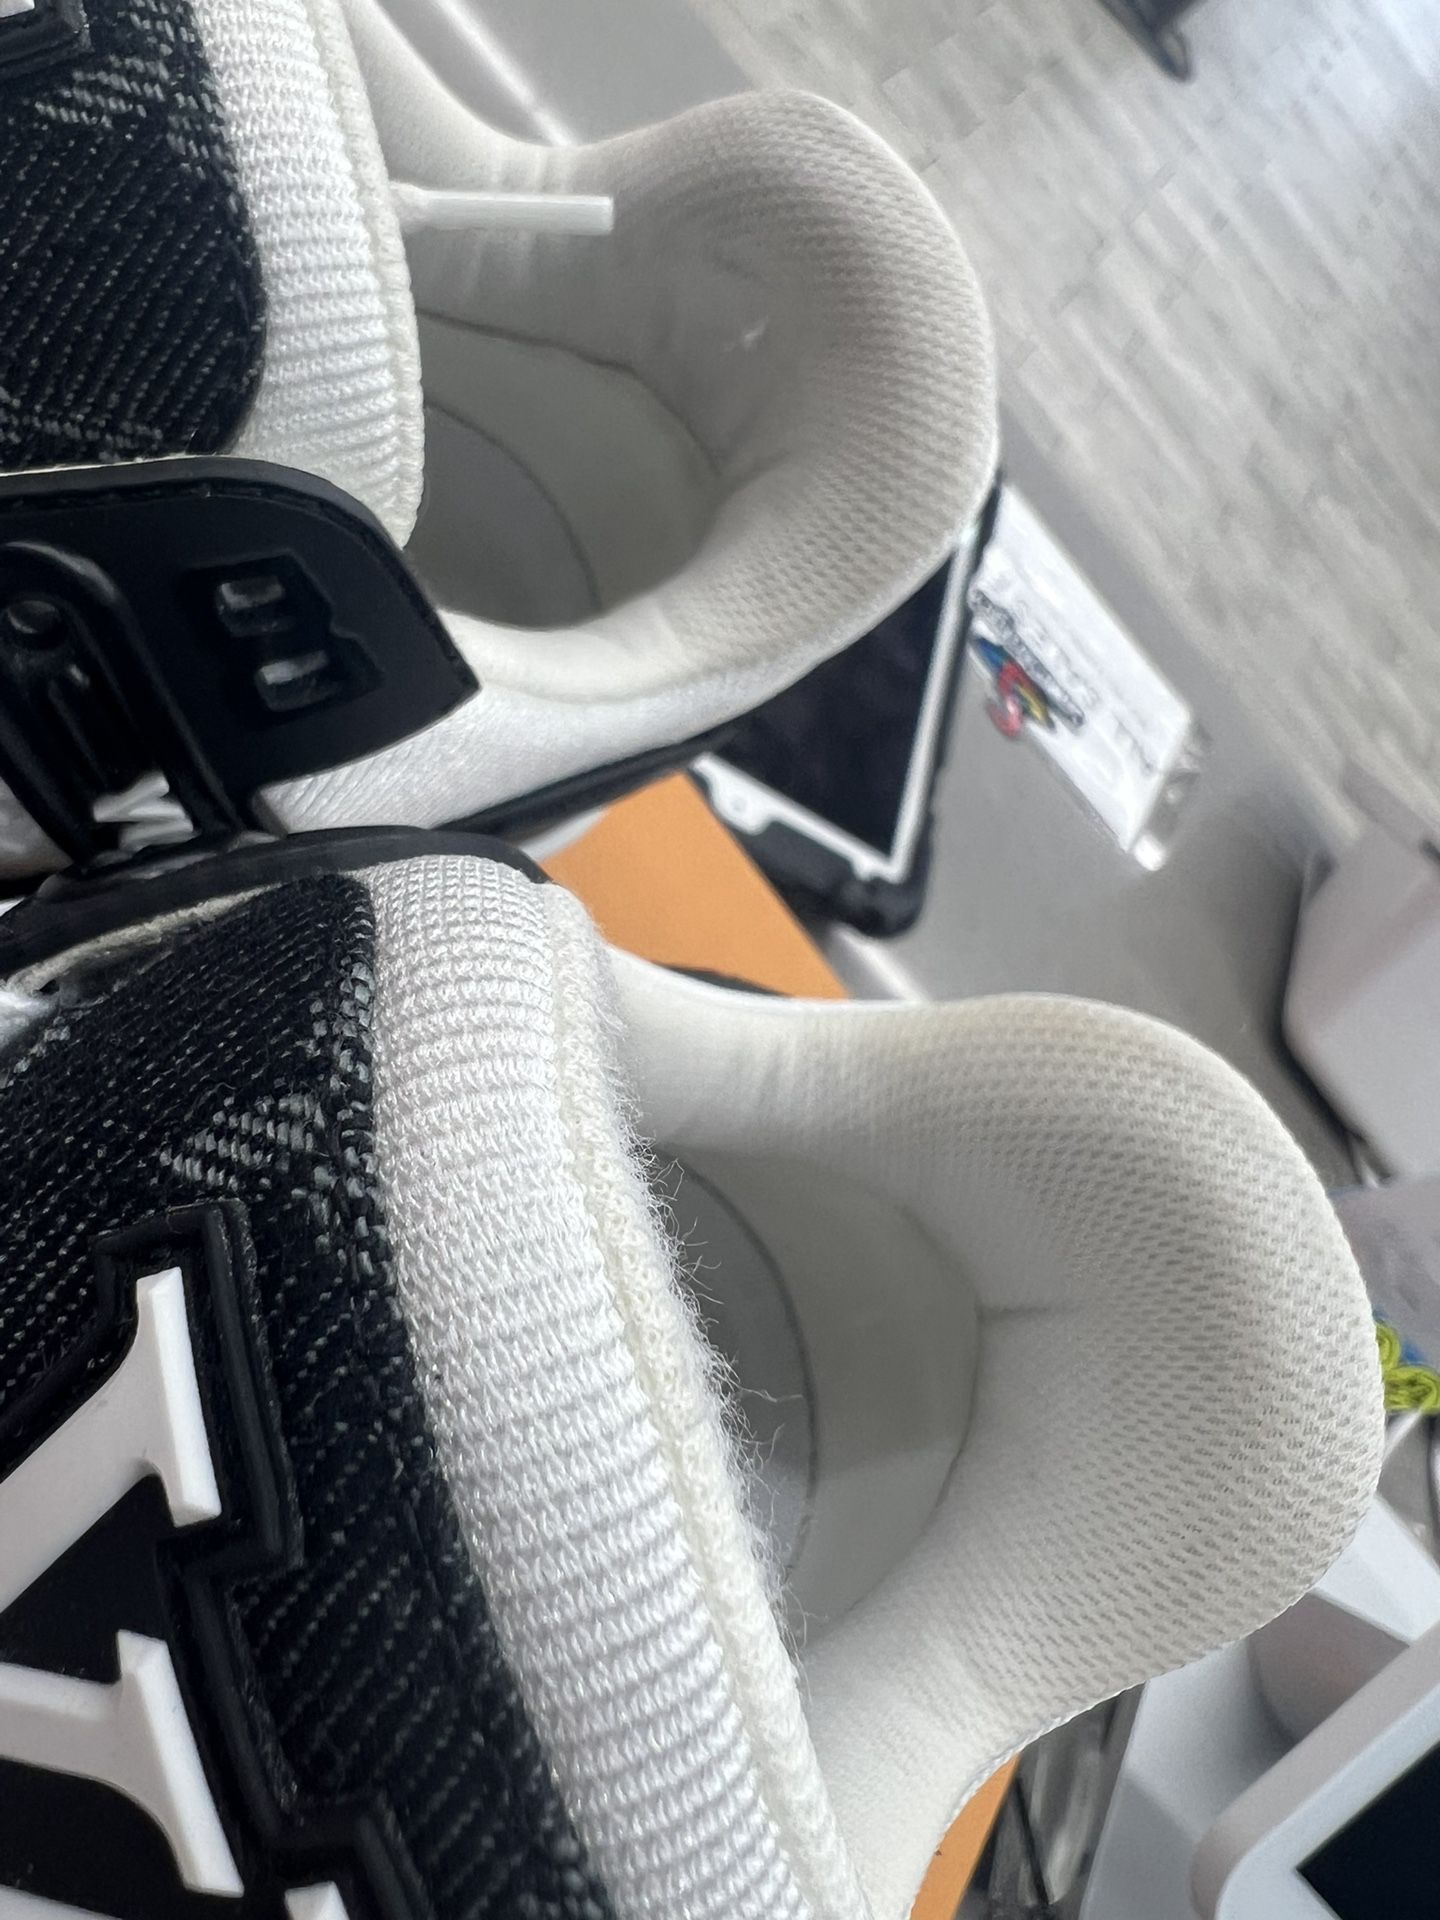 Louis Vuitton LV Trainer SS21 for Sale in Los Angeles, CA - OfferUp